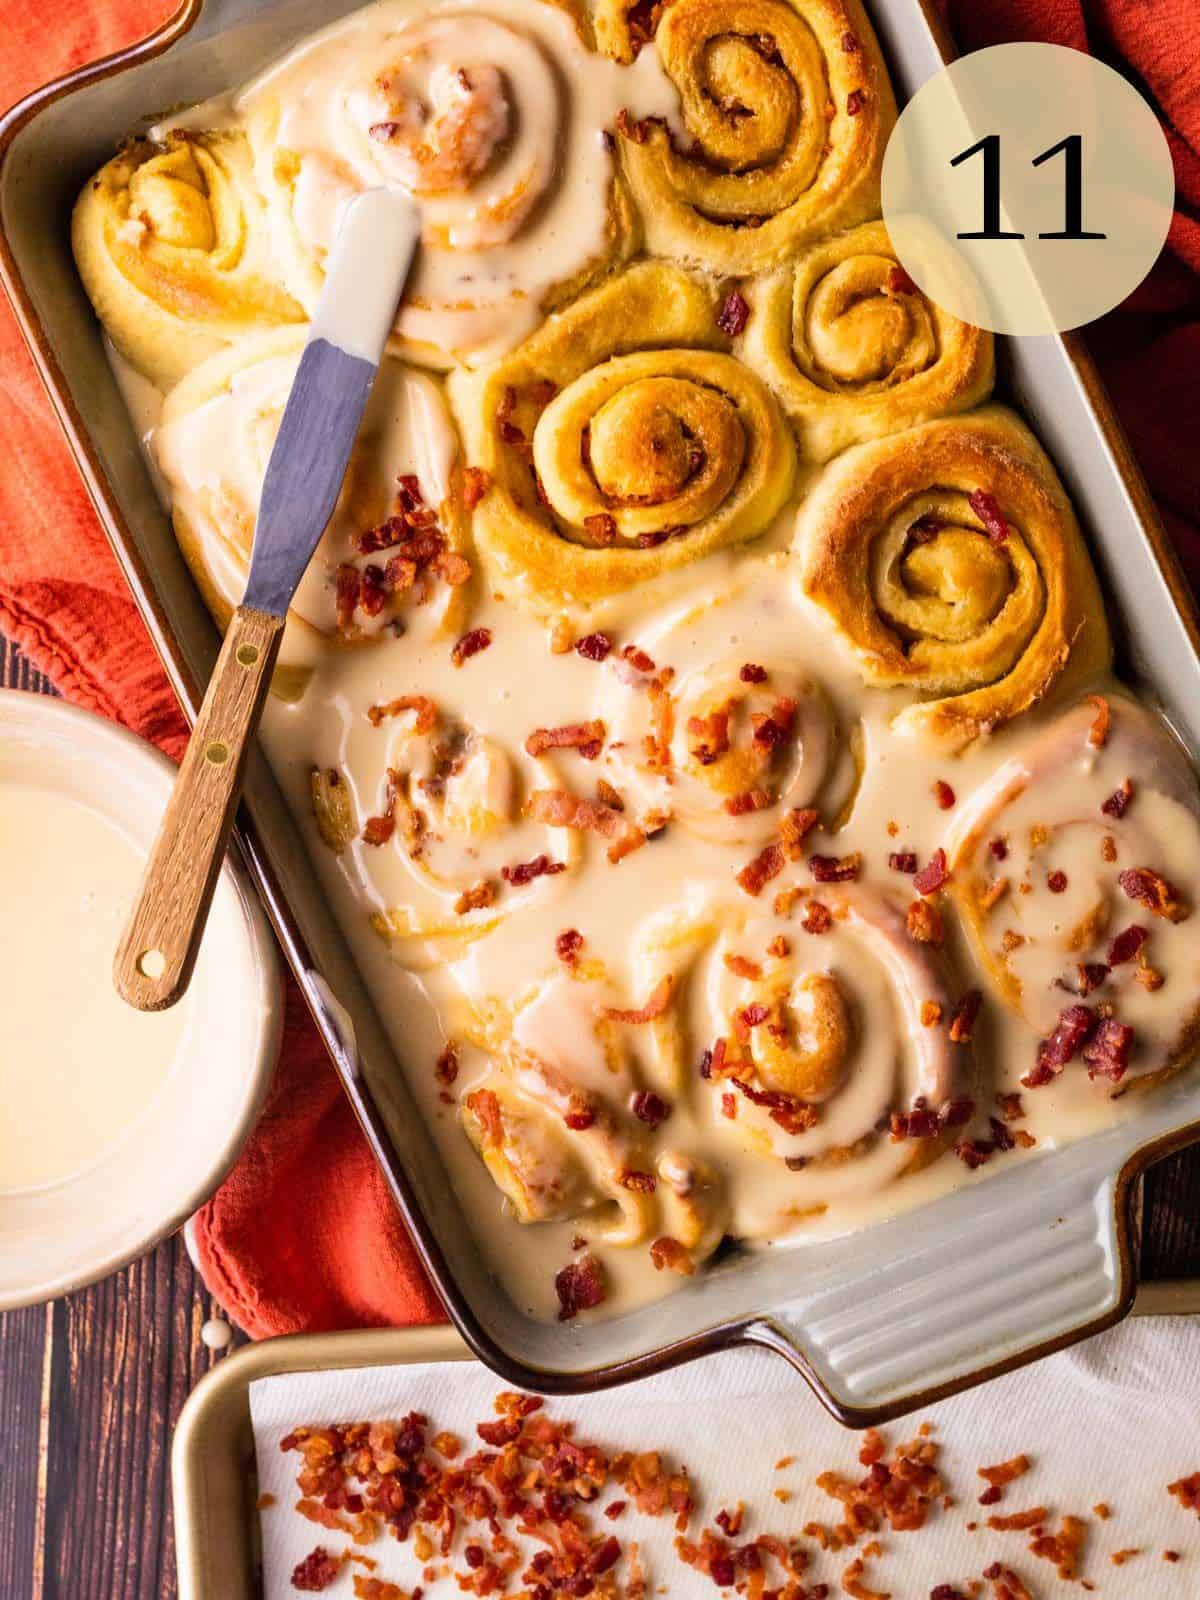 baked cinnamon rolls partially frosted with some crispy bacon pieces on it.